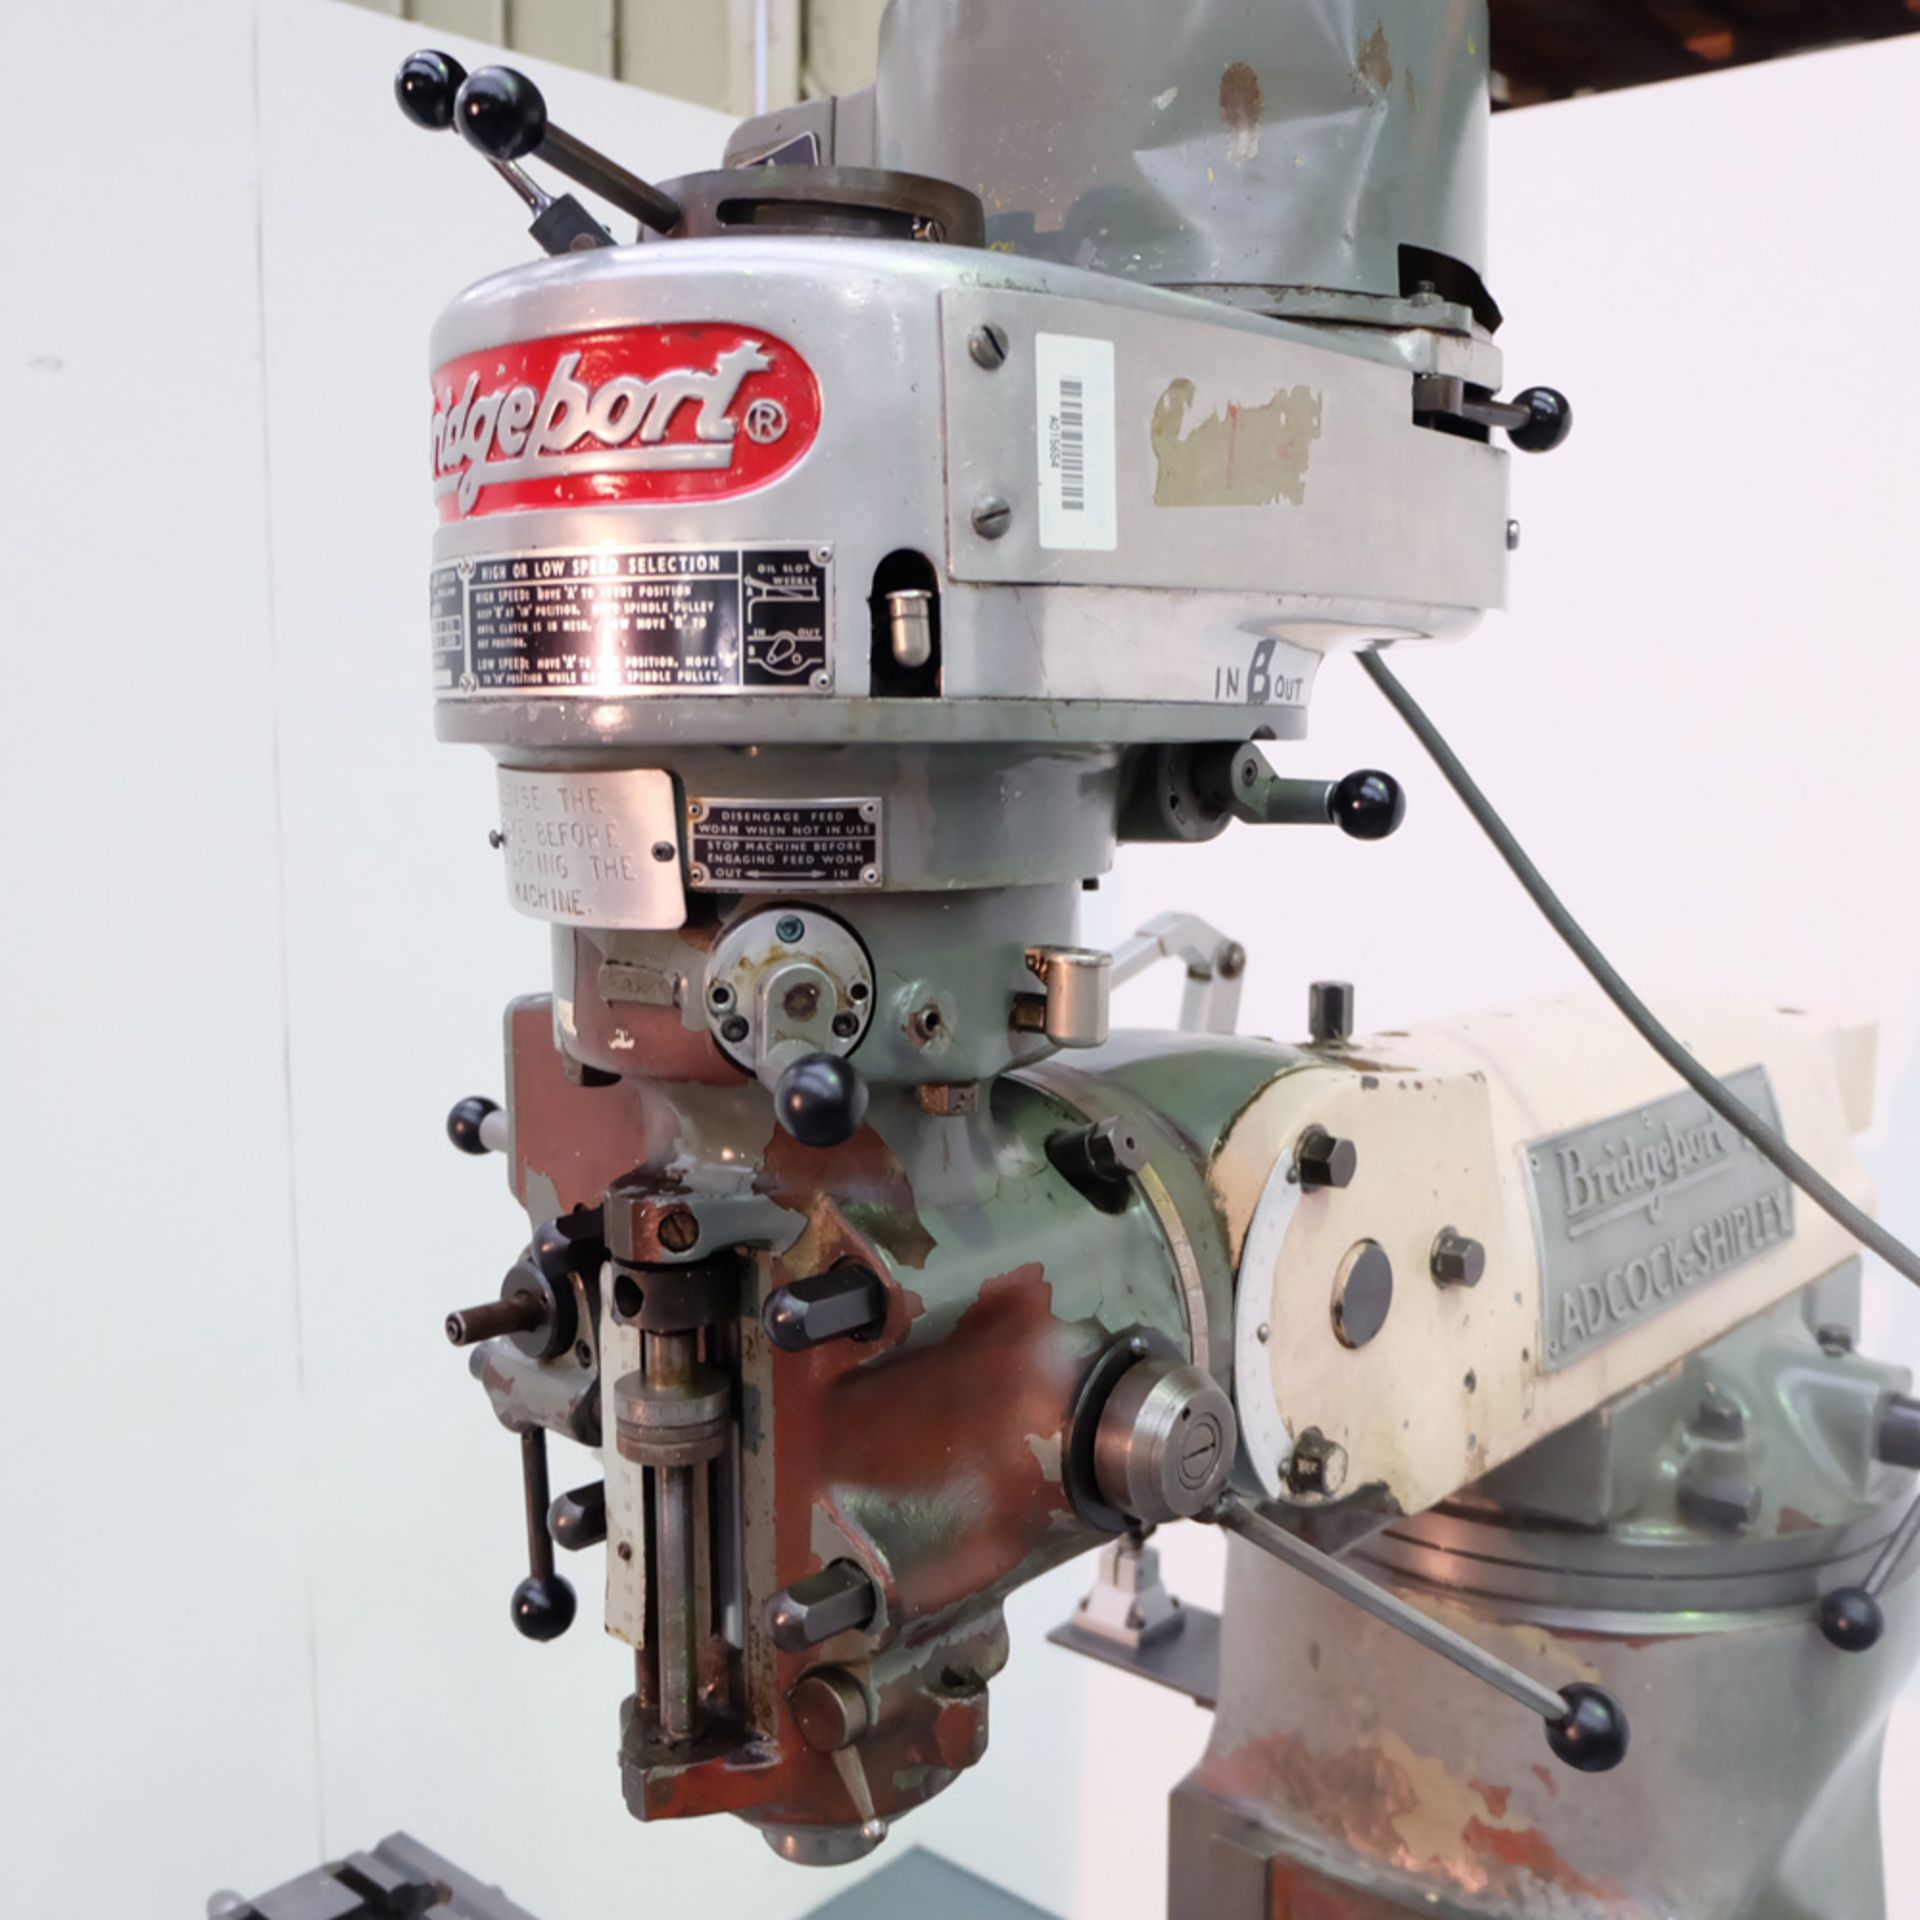 Bridgeport J Type Turret Milling Machine. Table Size 42" x 9". Spindle Taper R8. - Image 2 of 9